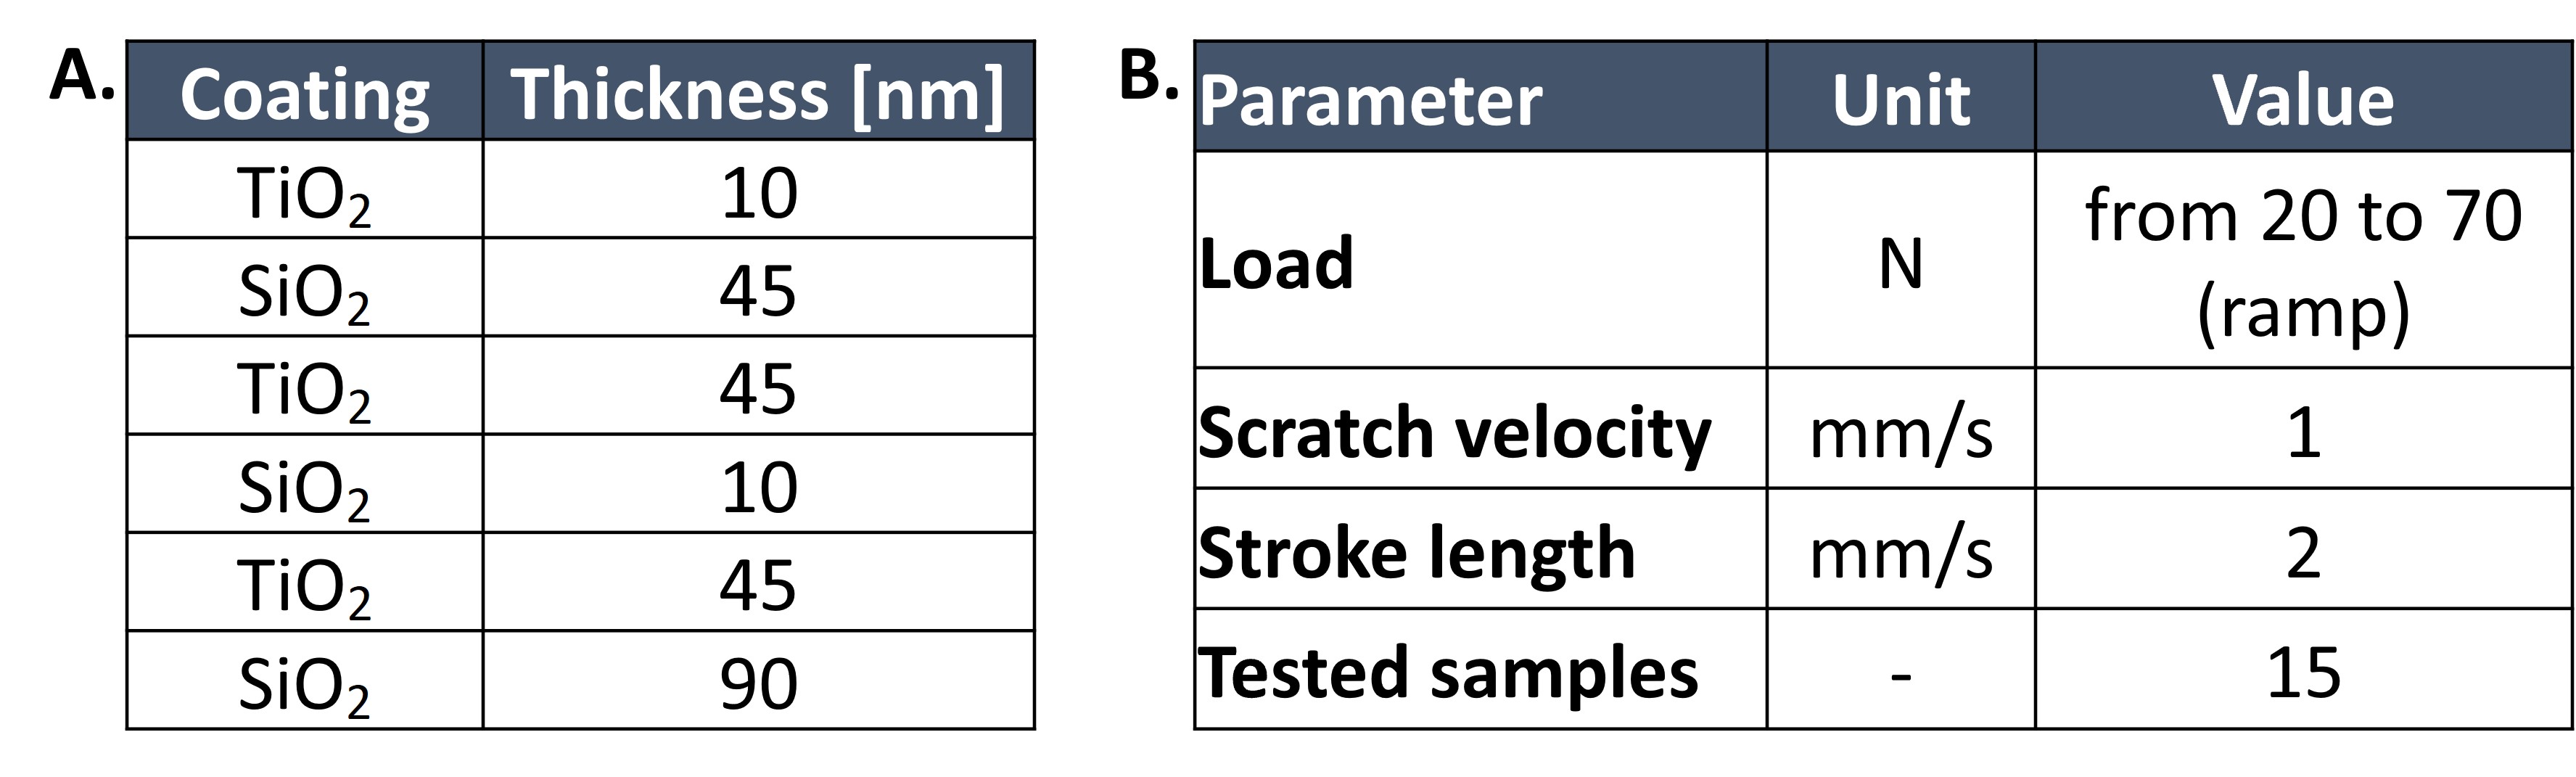 Table 1_materials and test parameters